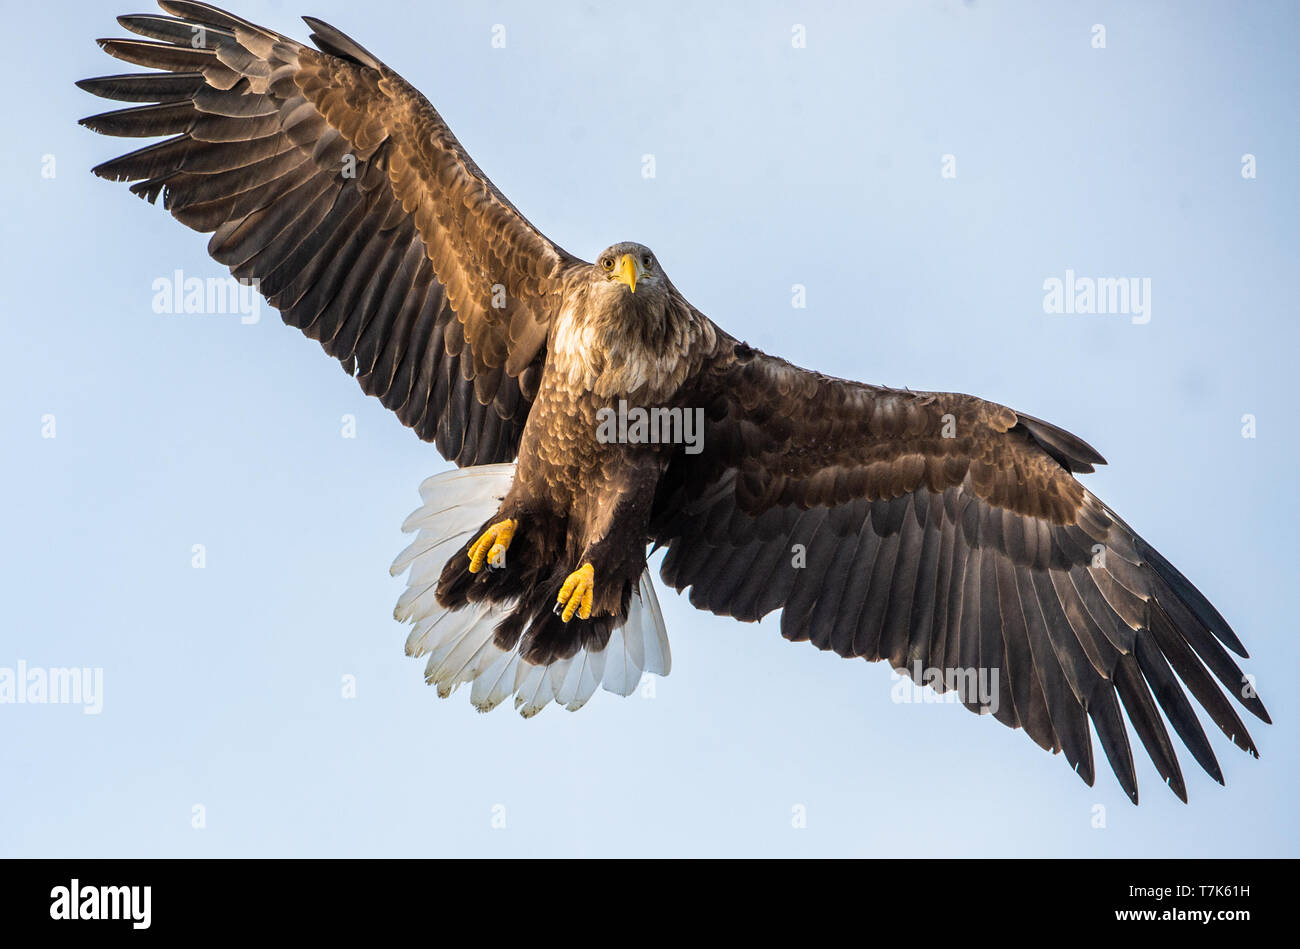 Adult White-tailed eagle in flight. Front view. Sky background. Scientific name: Haliaeetus albicilla, also known as the ern, erne, gray eagle, Eurasi Stock Photo